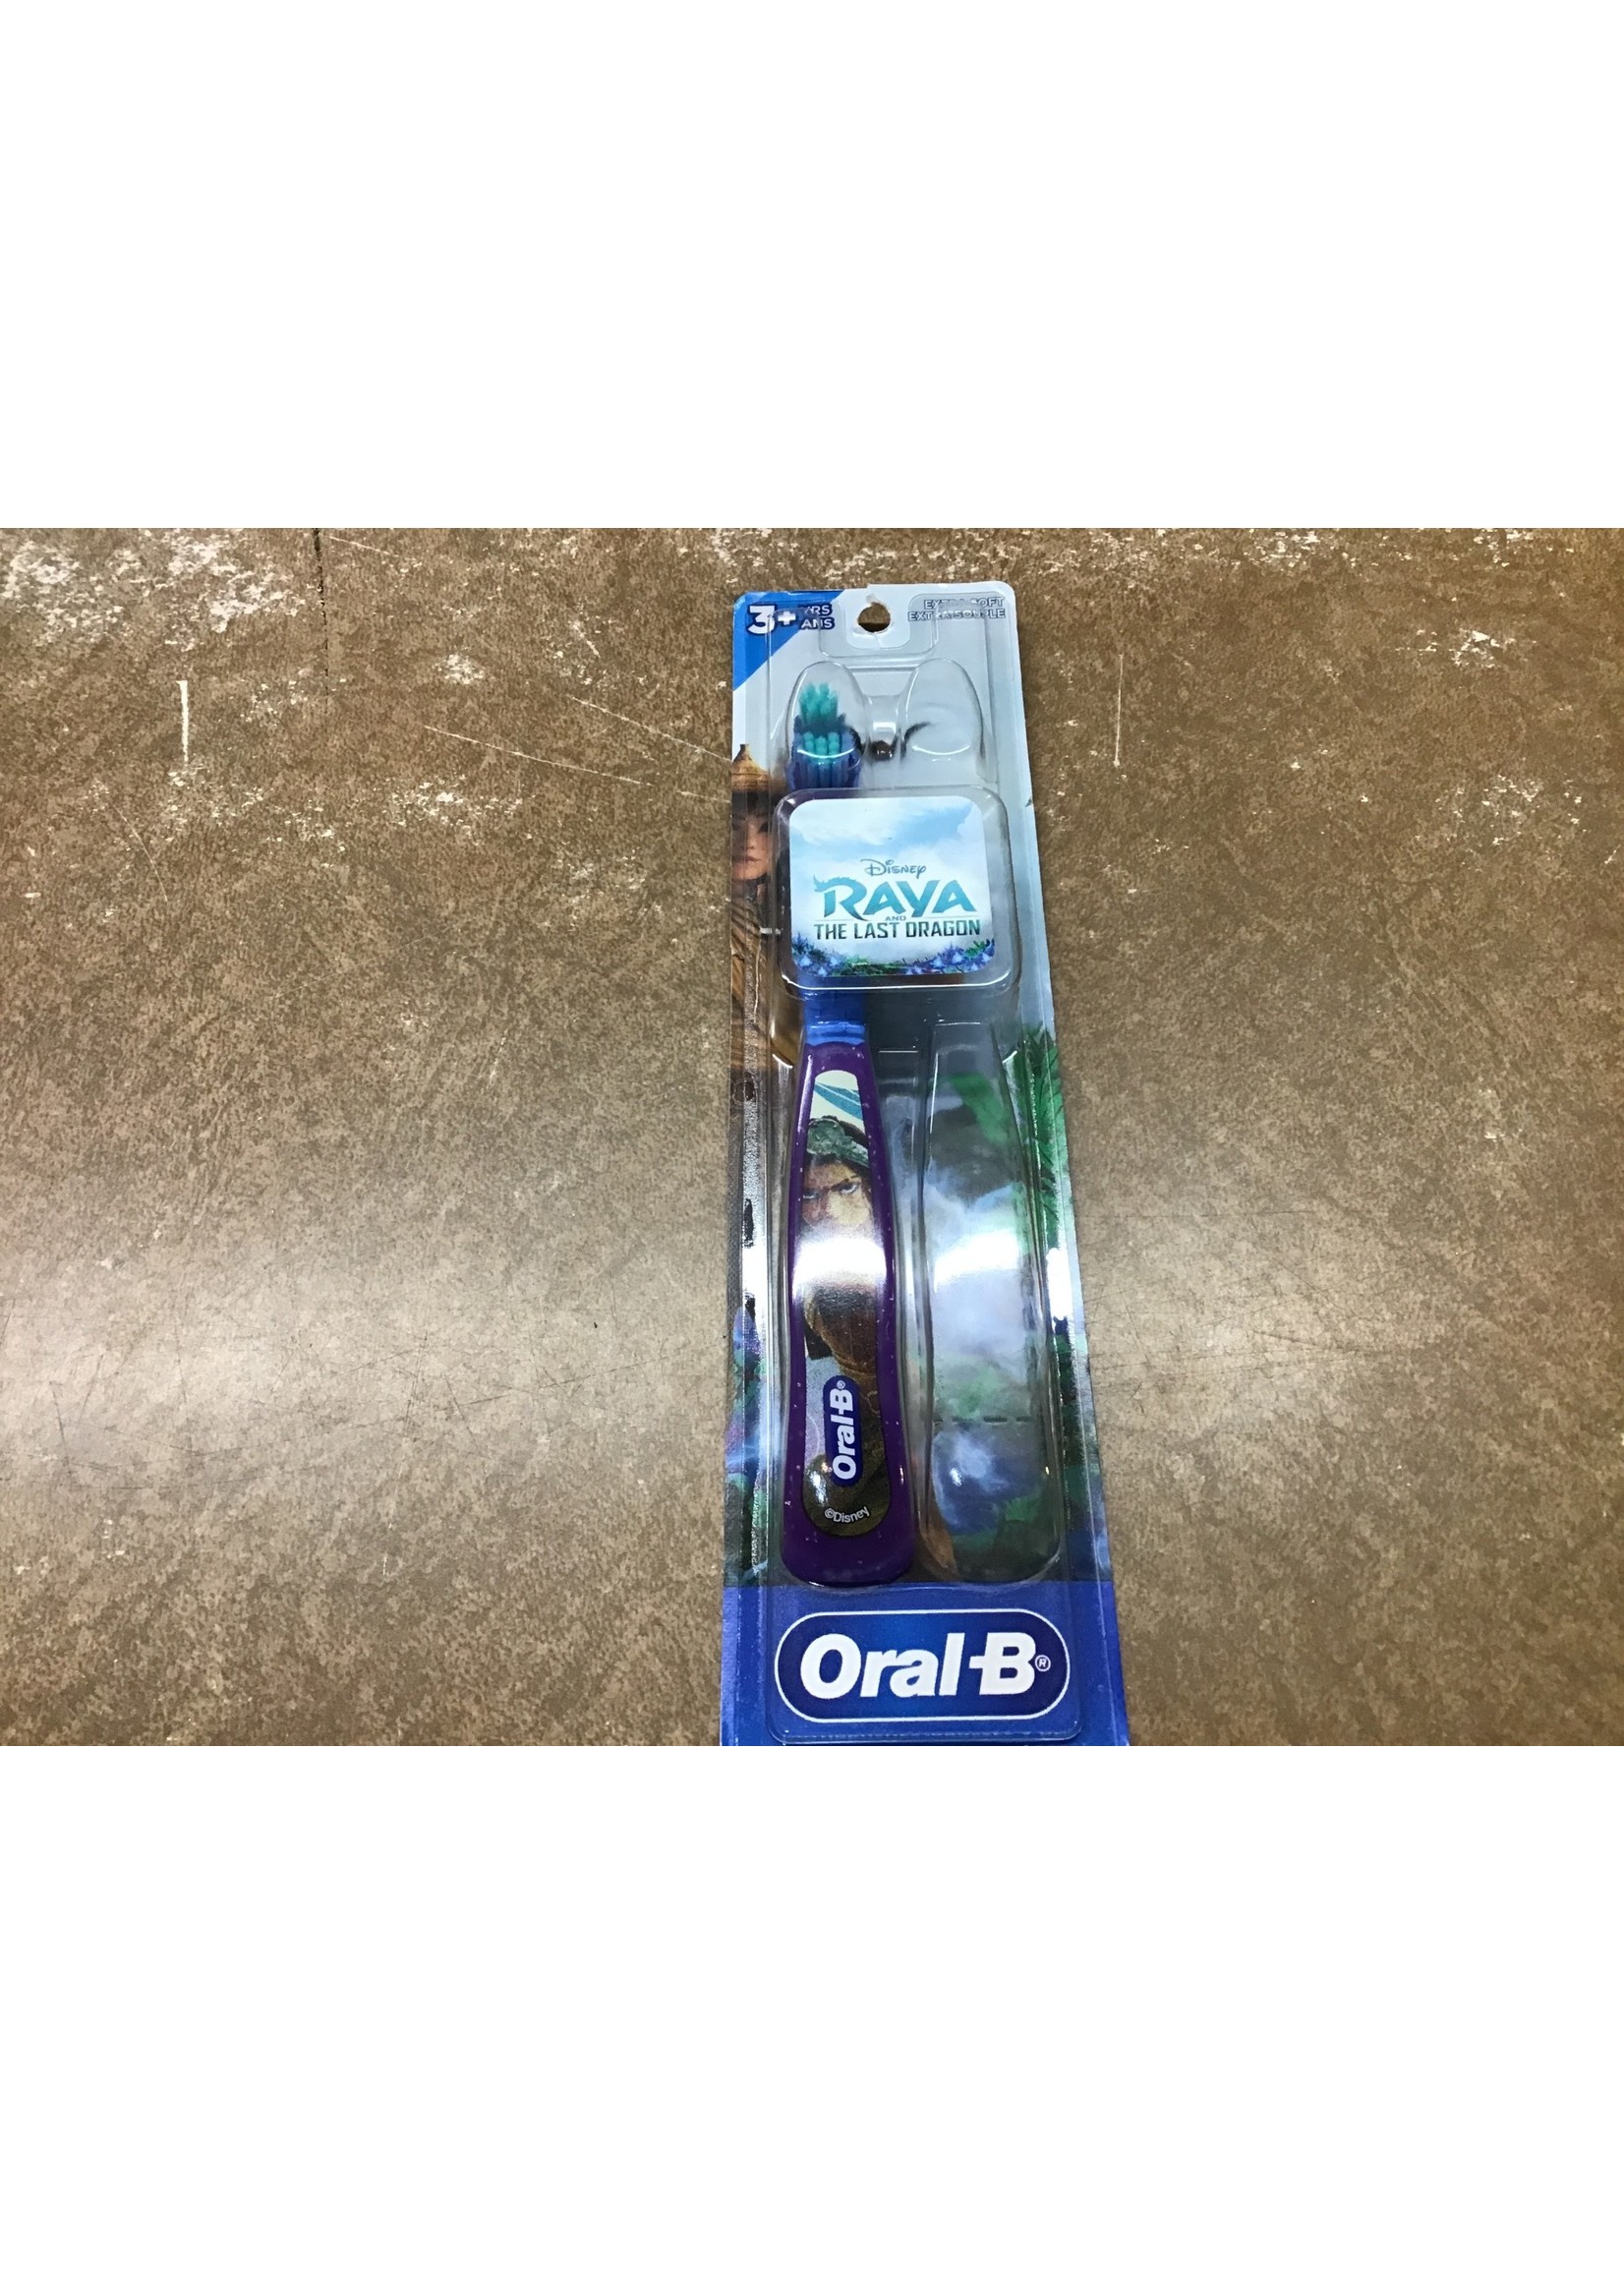 *missing 1* Oral-B Kids Manual Toothbrush featuring Disney's Raya and the Last Dragon - 2ct